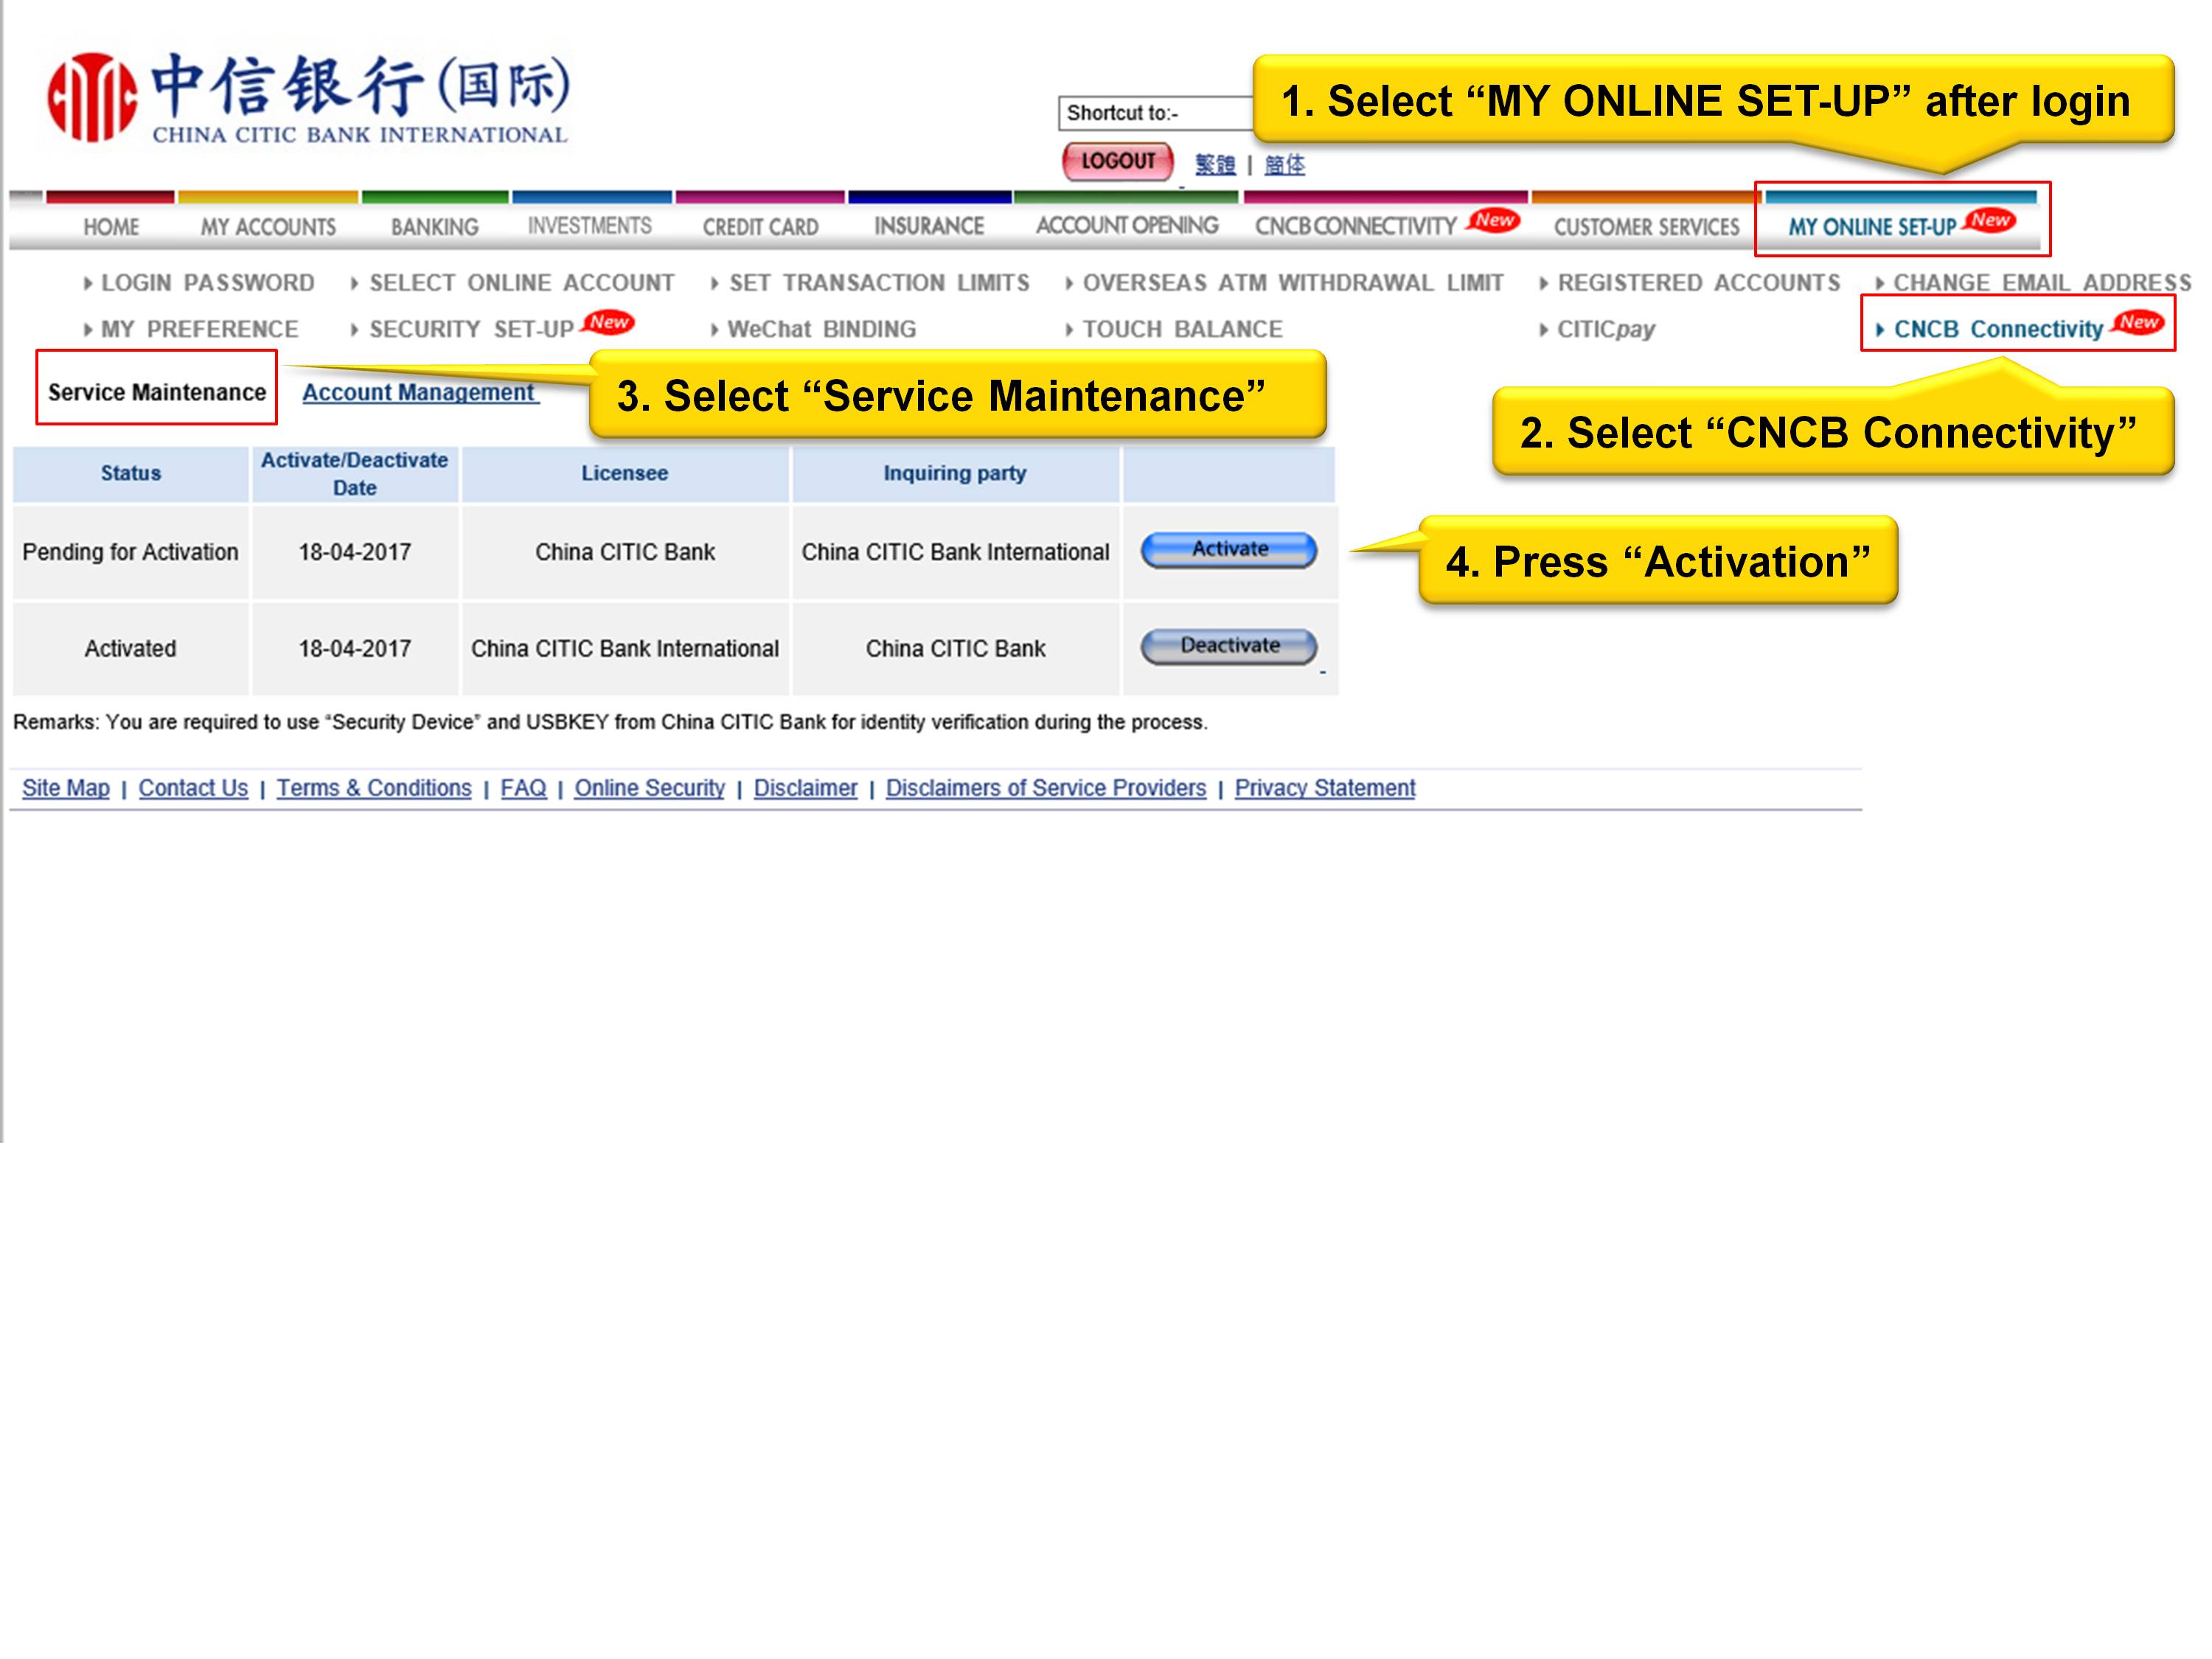 1. Selecy "MY ONLINE SET-UP" after login 2. Select "CNCB Connectivity" 3. Select "Service Maintenance" 4. Press "Activation"